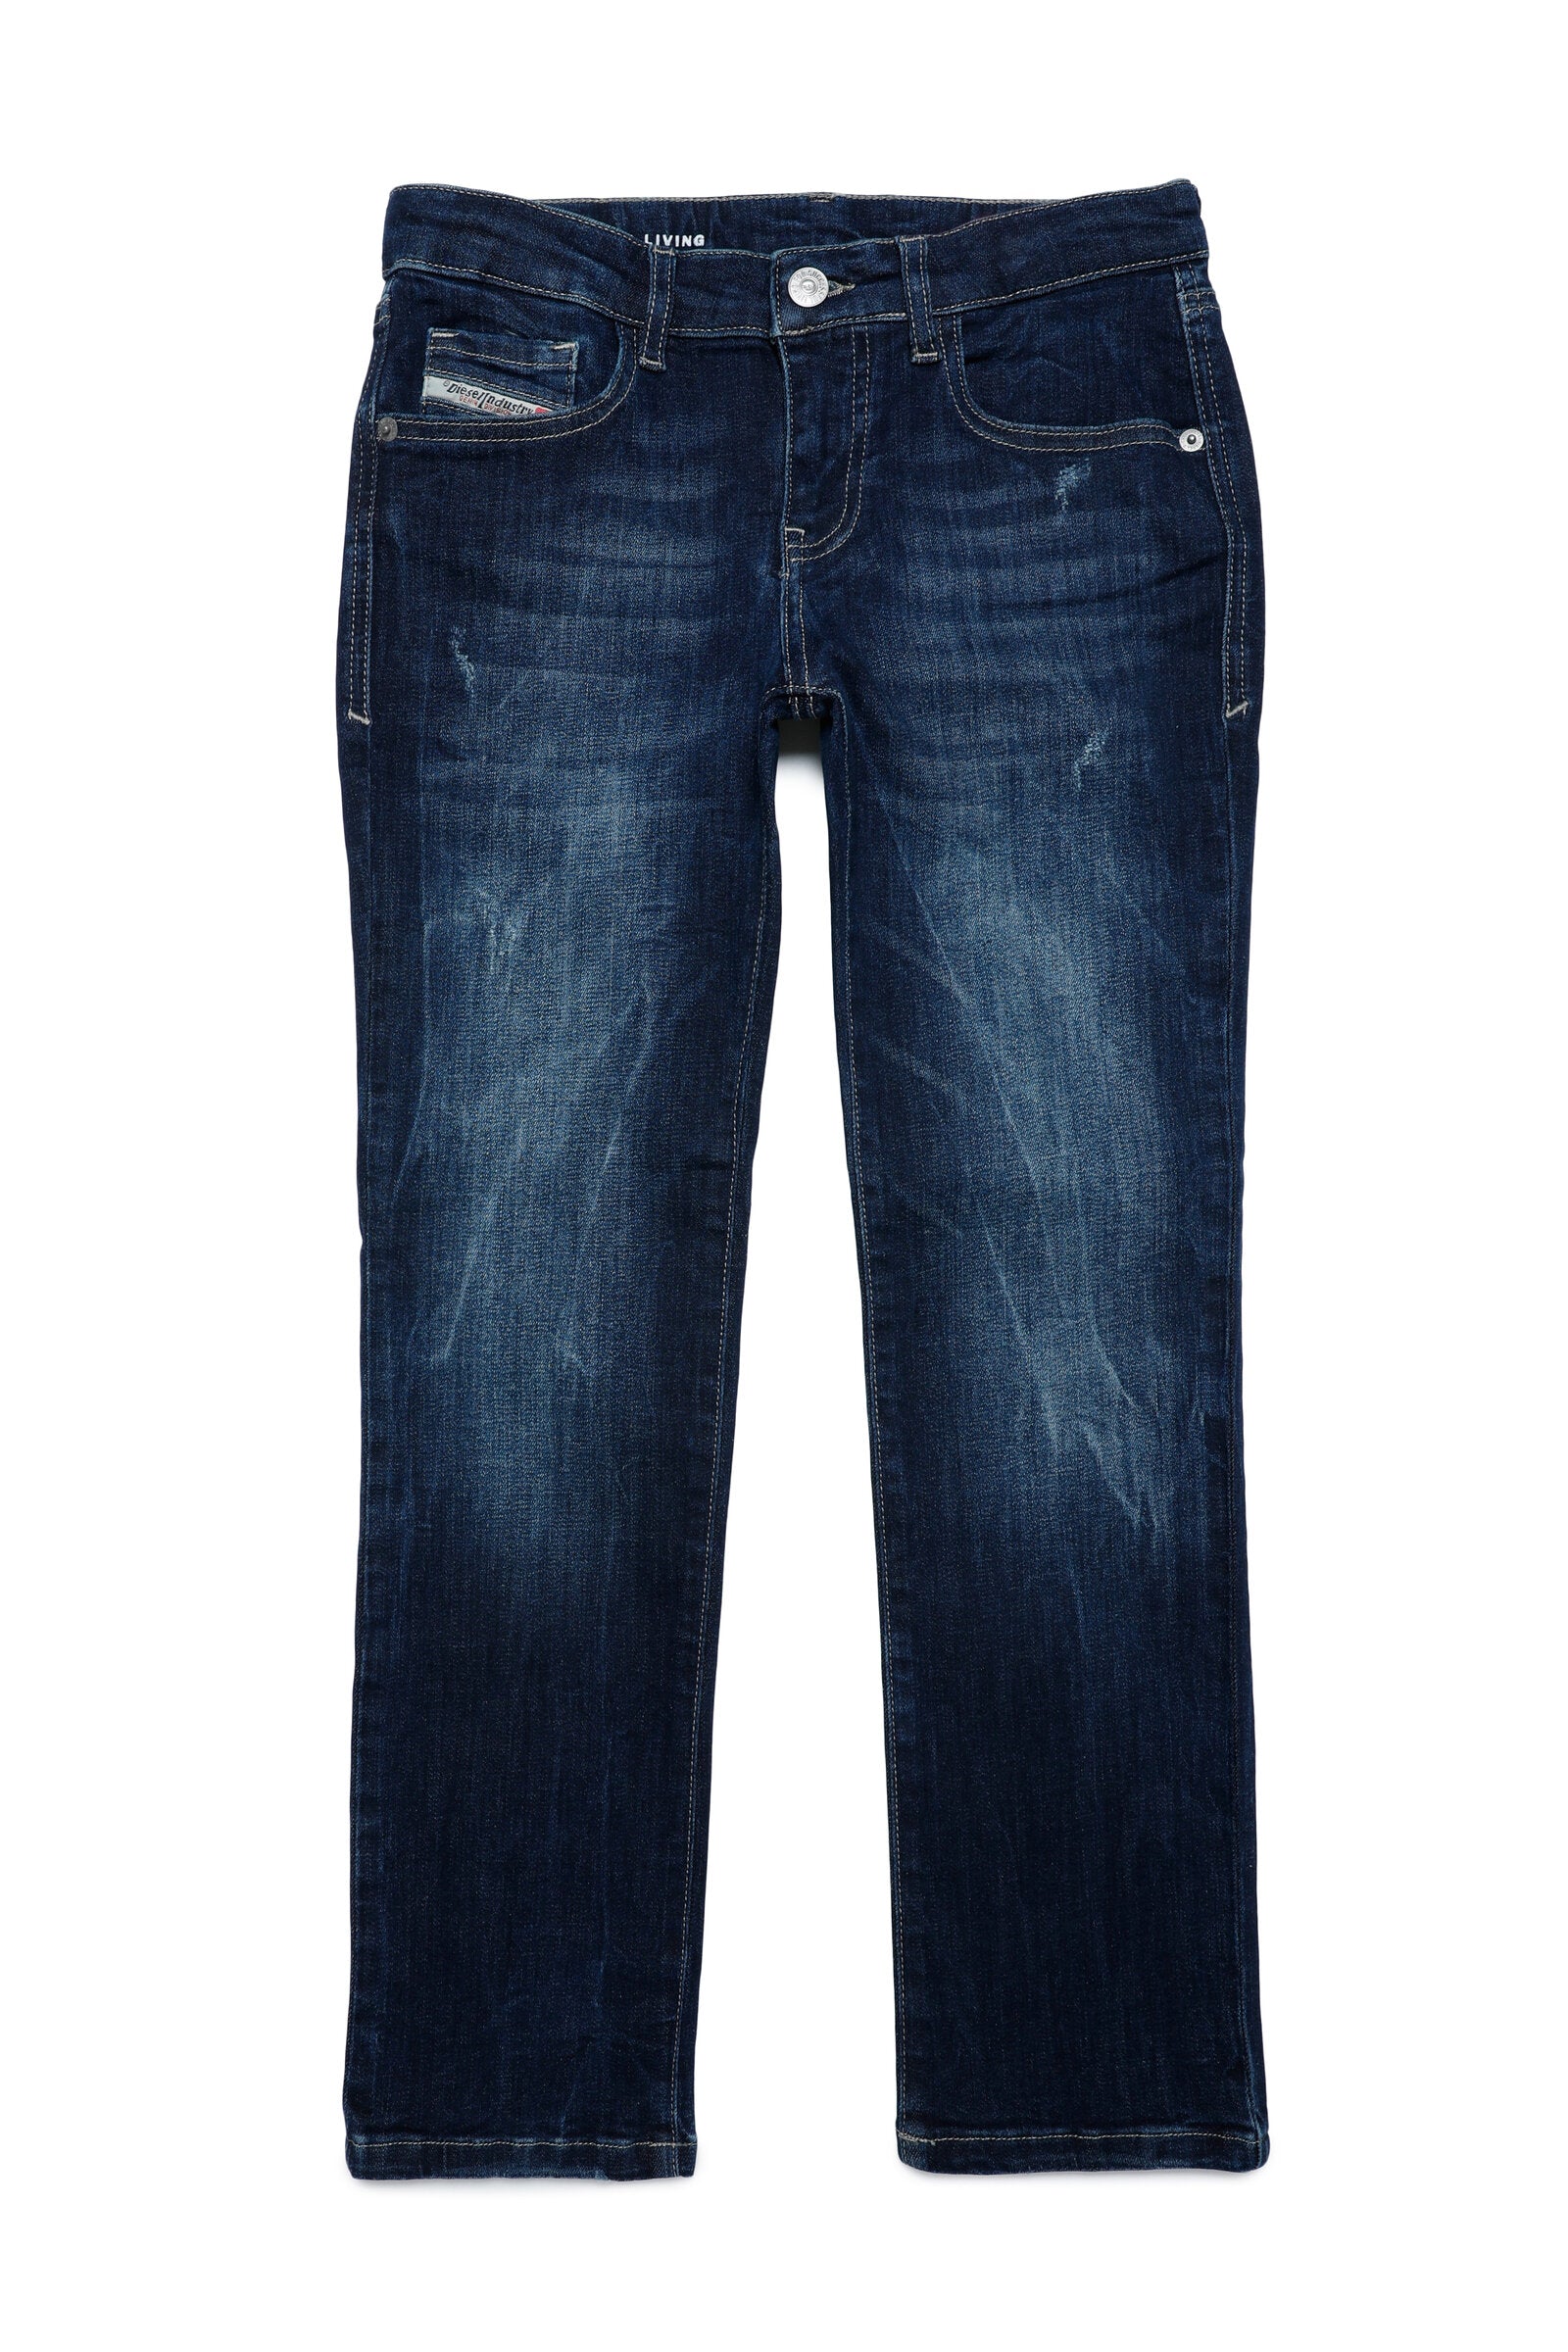 Jeans 2002 straight dark blue shaded jeans